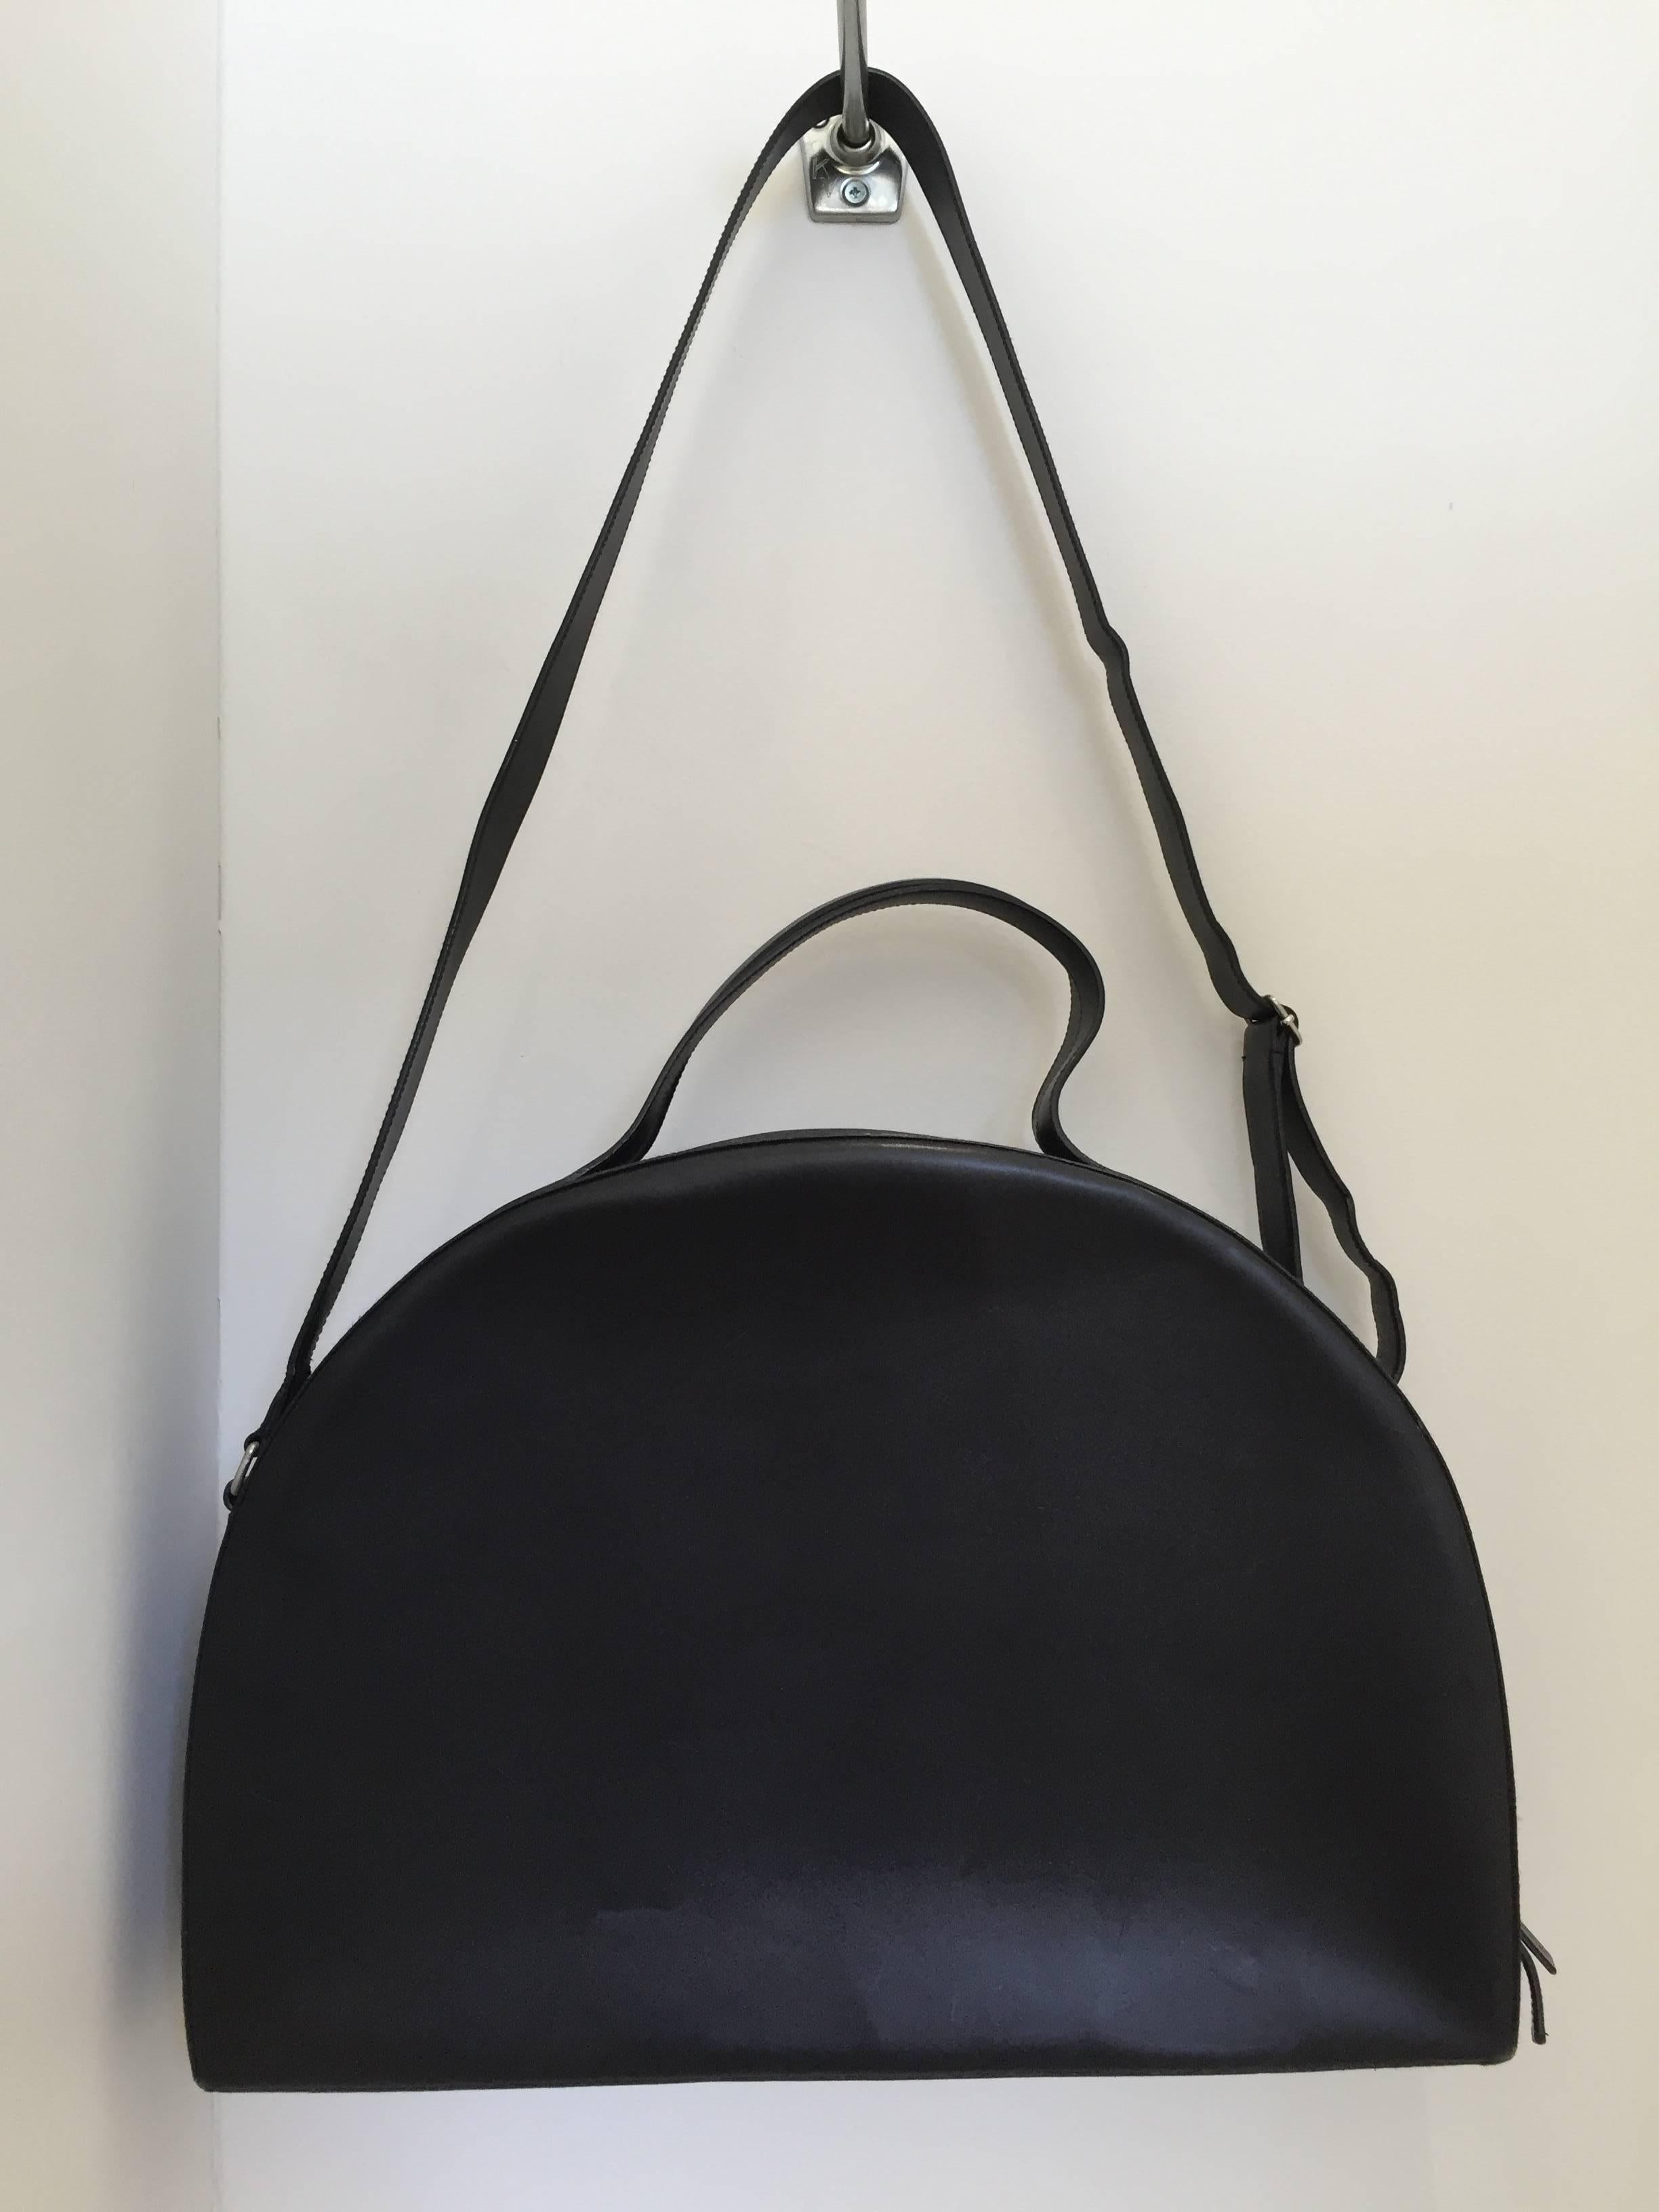 Rare 1990s Vintage Helmut Lang black leather bag from early 2000s.
Light minor scratches on sides of bag ( see pictures)
Interior is perfect ( no stains/ no scratch)
Bag Measurement: 18” width/ 13” H/. 4 1/2 Depth
Straps measurement: 50” adjustable